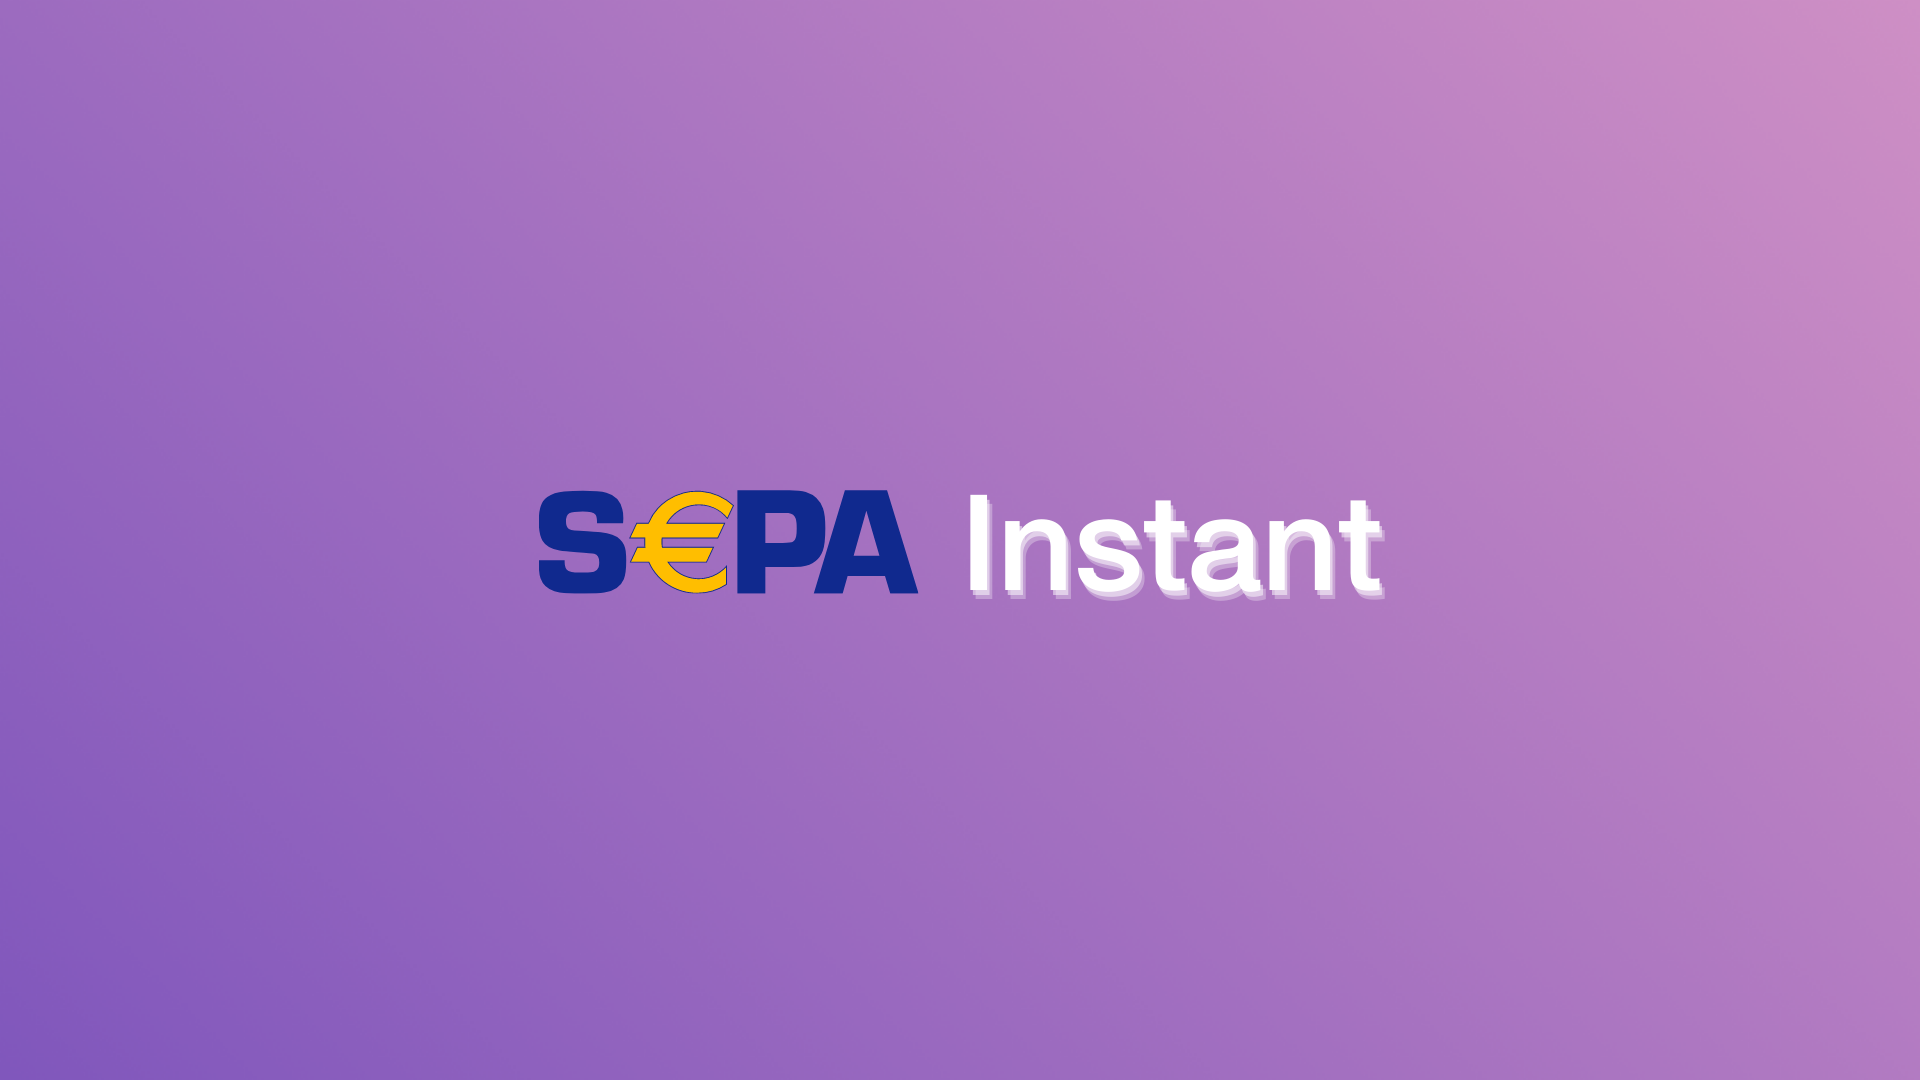 SEPA logo with "instant" suffixed